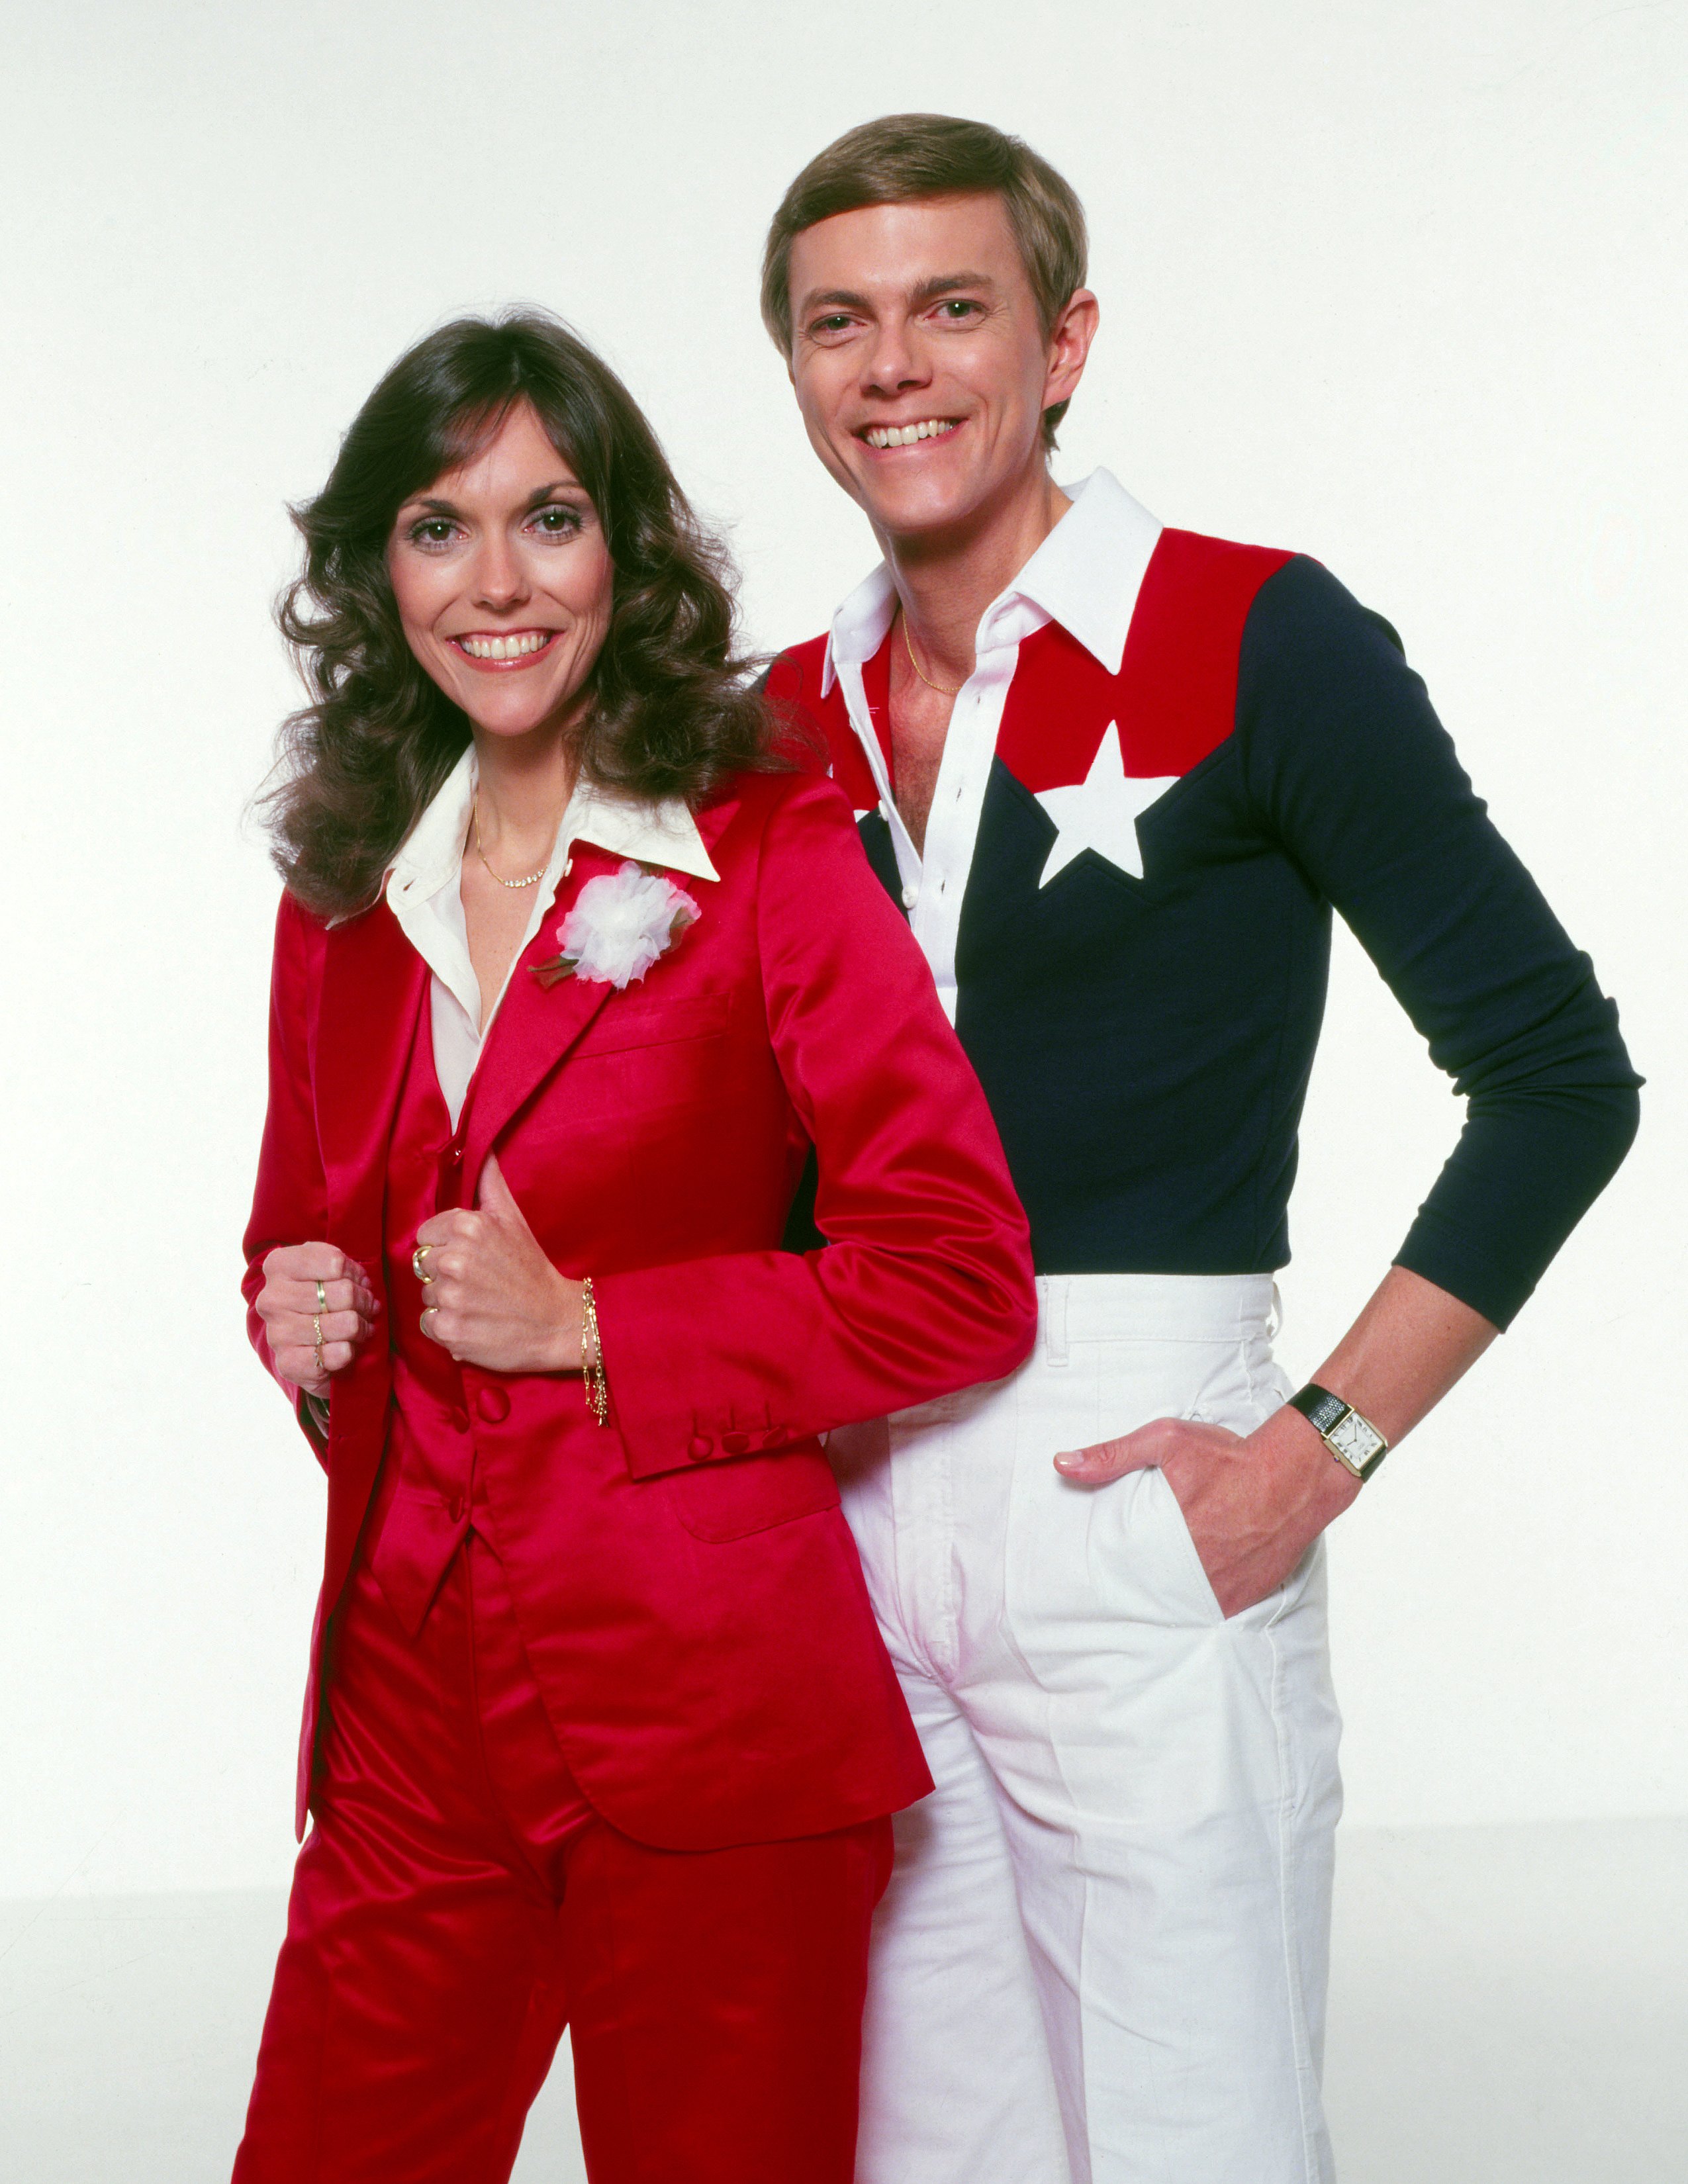 Karen and Richard Carpenter of the Carpenters pose for a portrait in 1981 in Los Angeles, California | Source: Getty Images